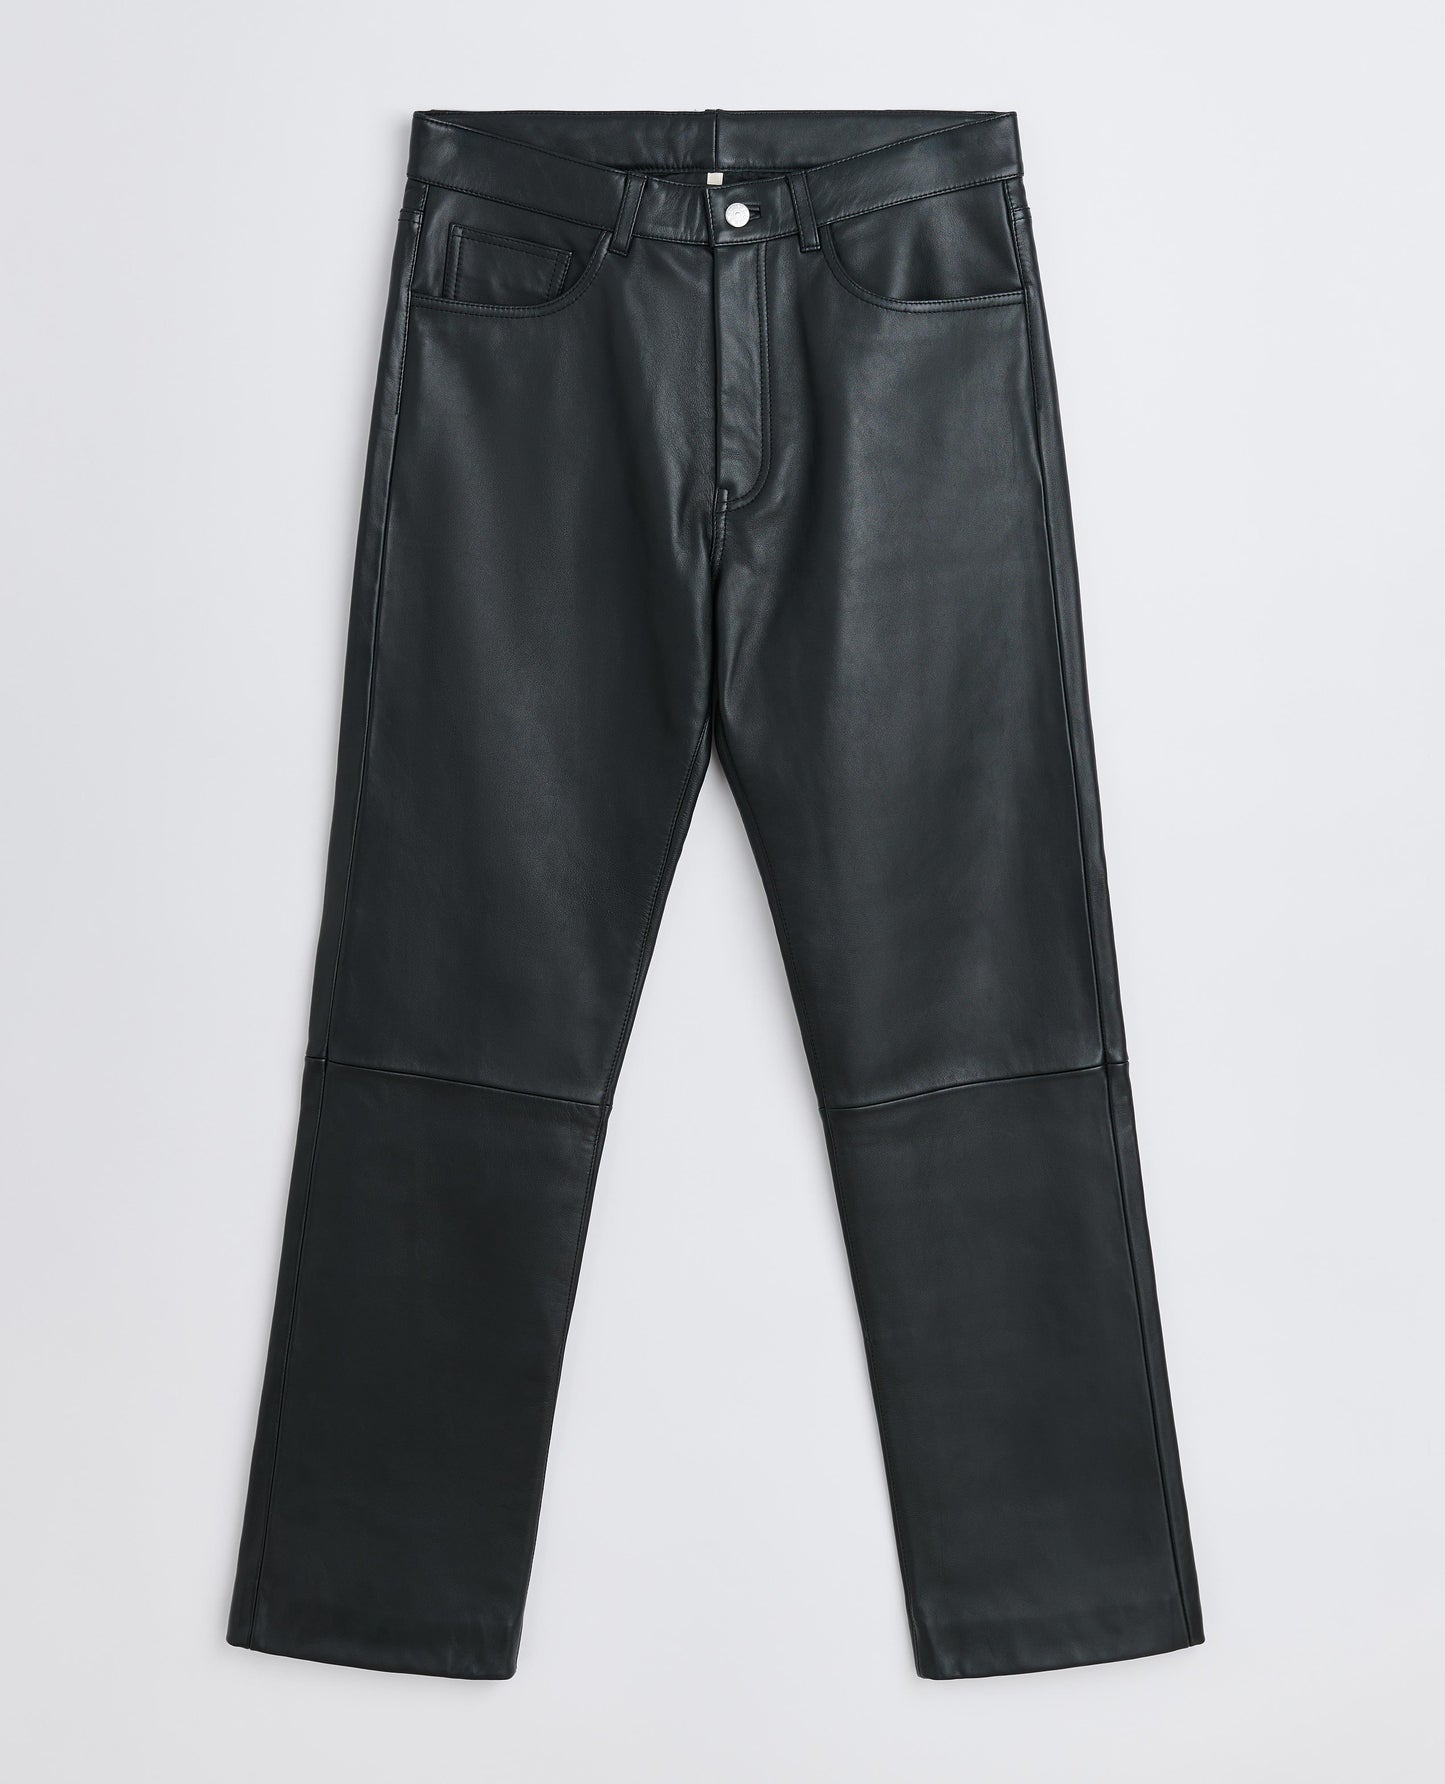 STRAIGHT LEATHER TROUSER . BLACK